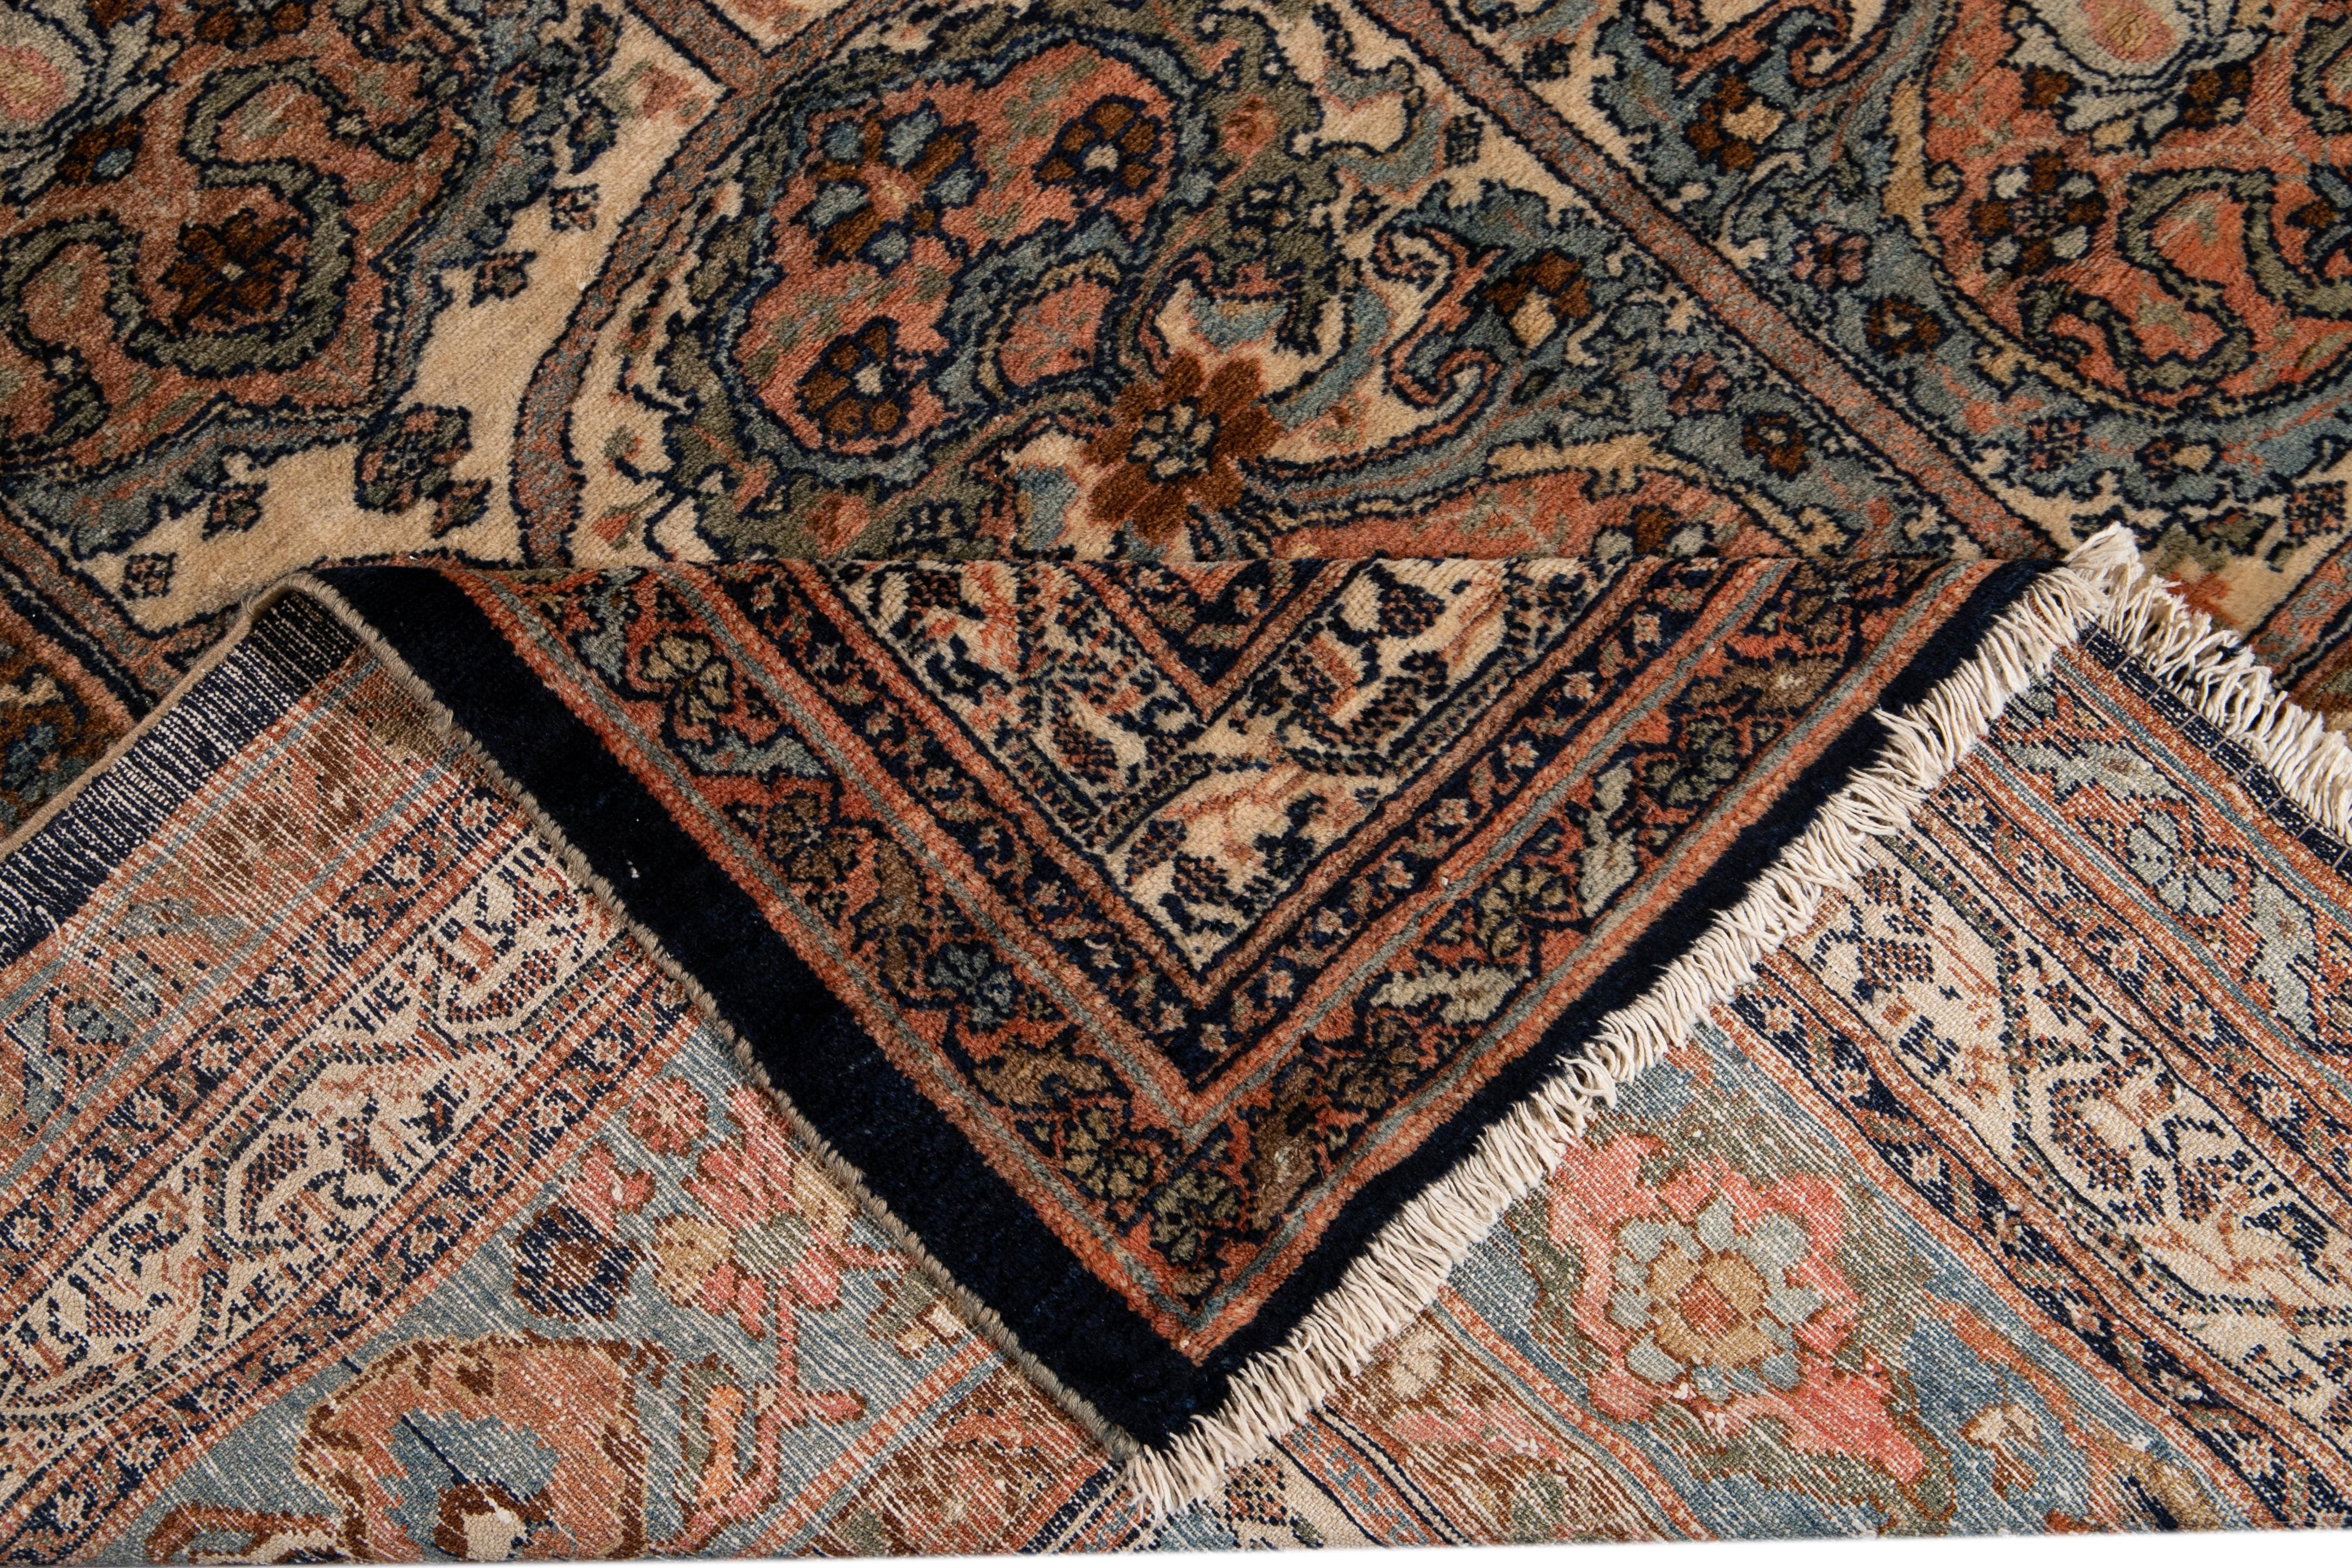 Beautiful antique Bibikabad hand-knotted wool rug with a beige field. This piece has a designed frame with peach, green, and blue accent colors on a gorgeous all-over classic garden floral design.

This rug measures 11'6